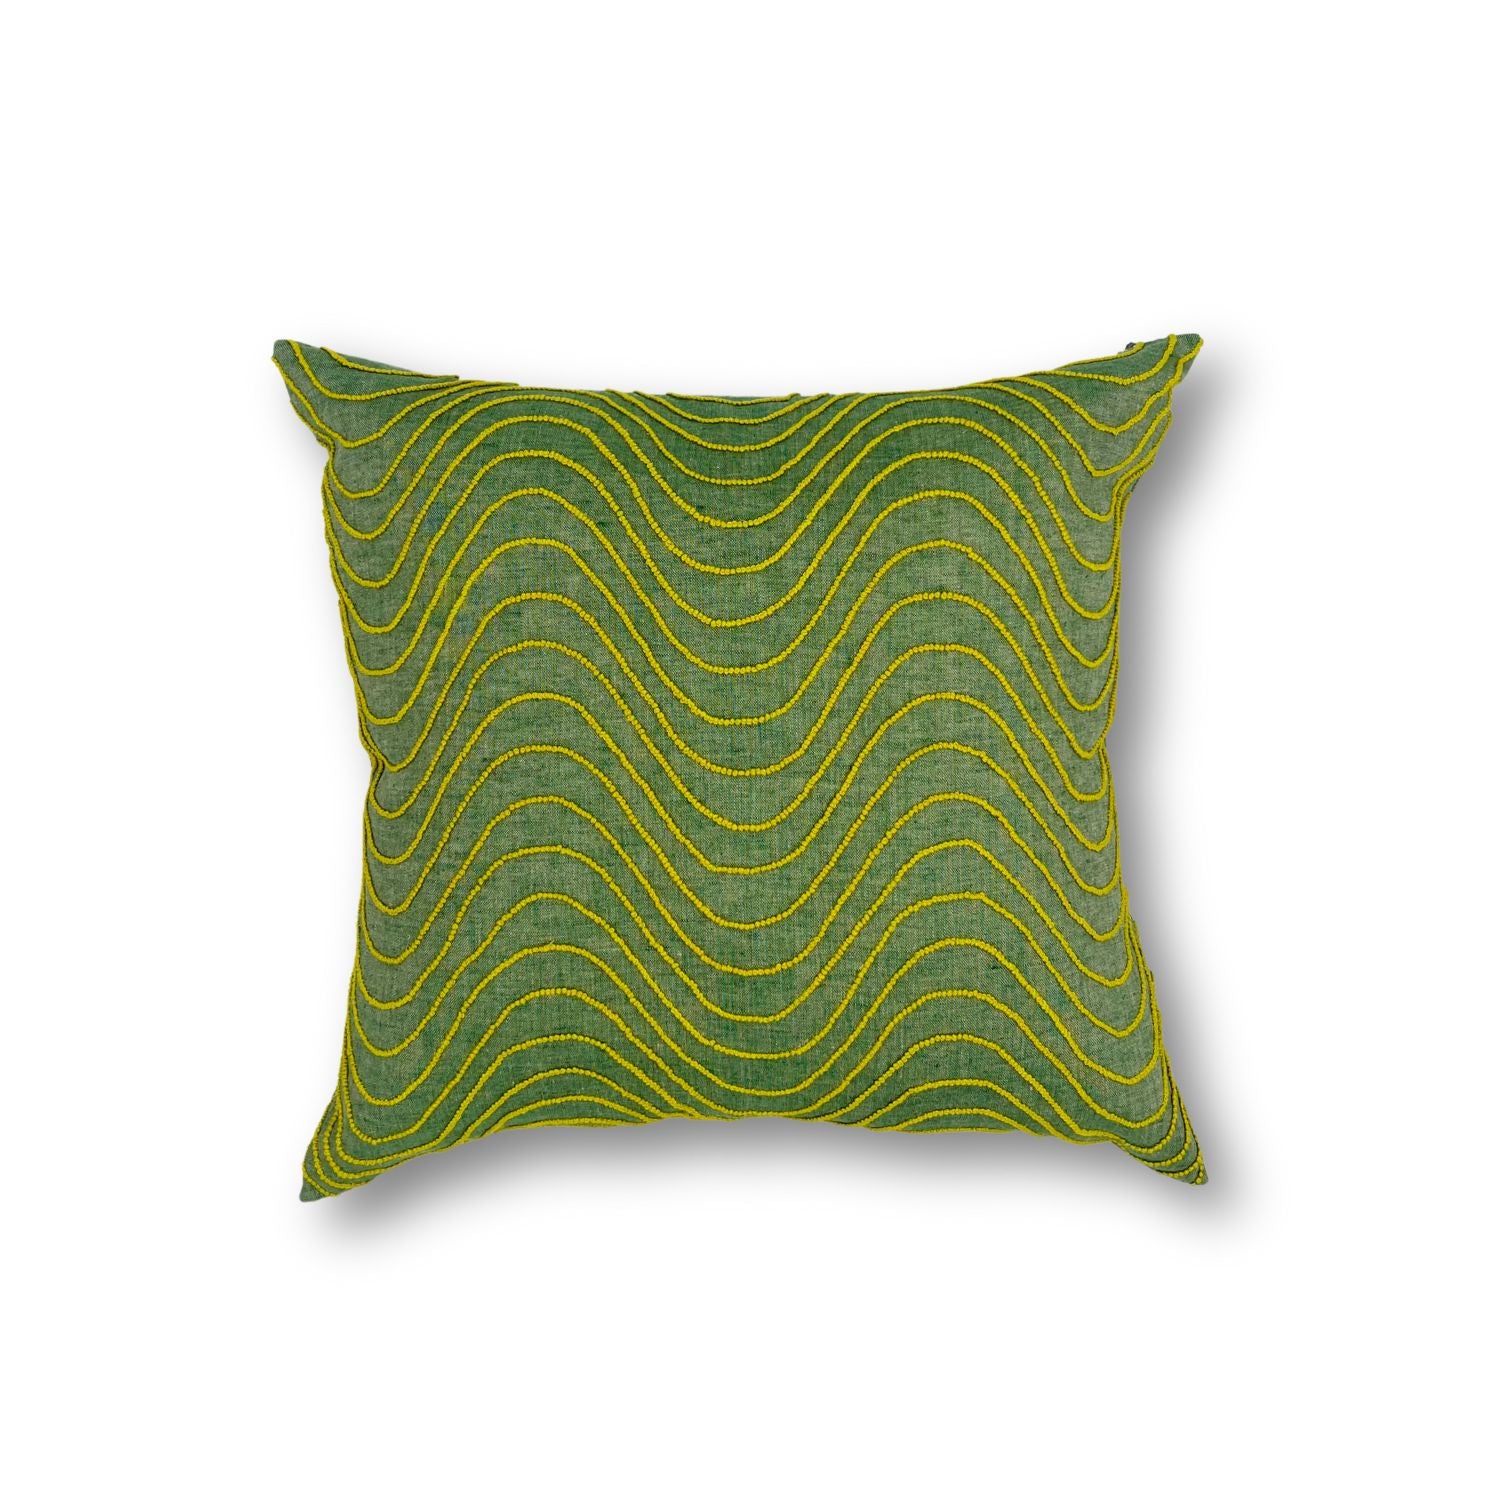 Square throw pillow with an undulating dimensional embroidery pattern in yellow thread on a green silk field.